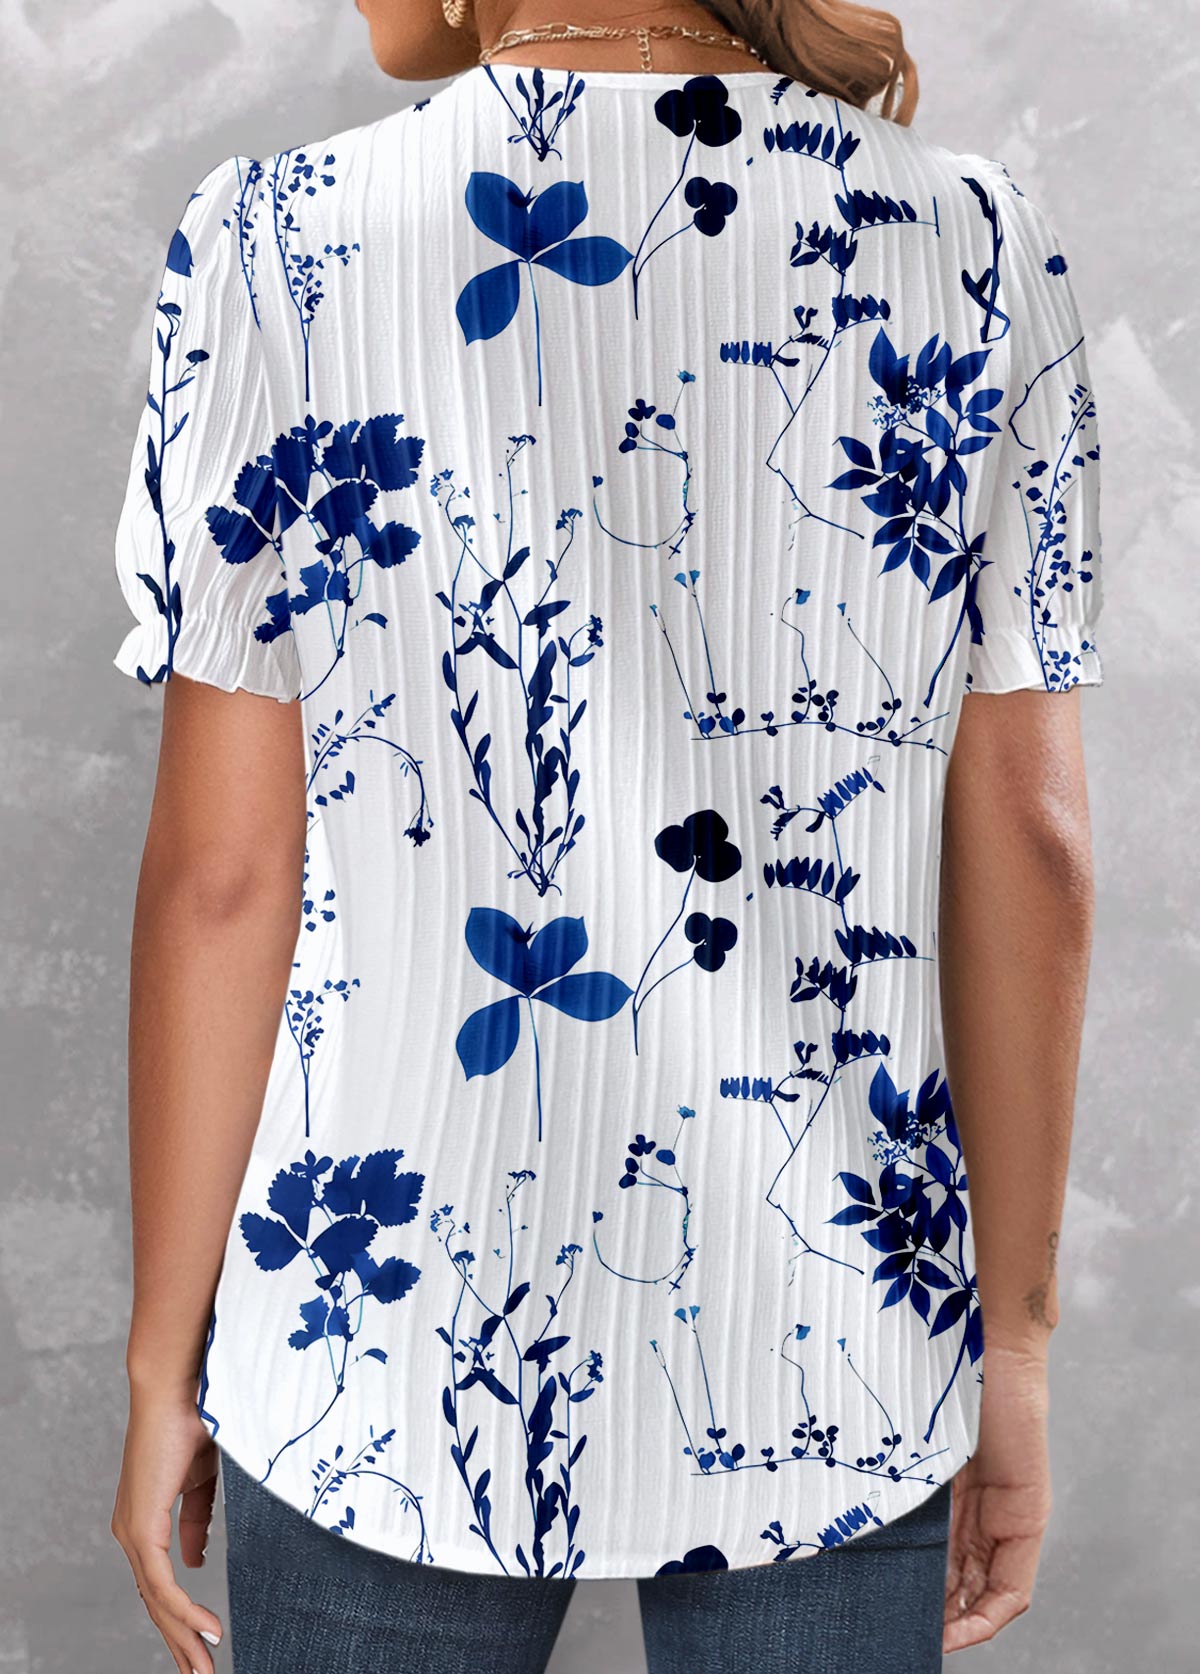 Dark Blue Embroidery Floral Print Short Sleeve Blouse